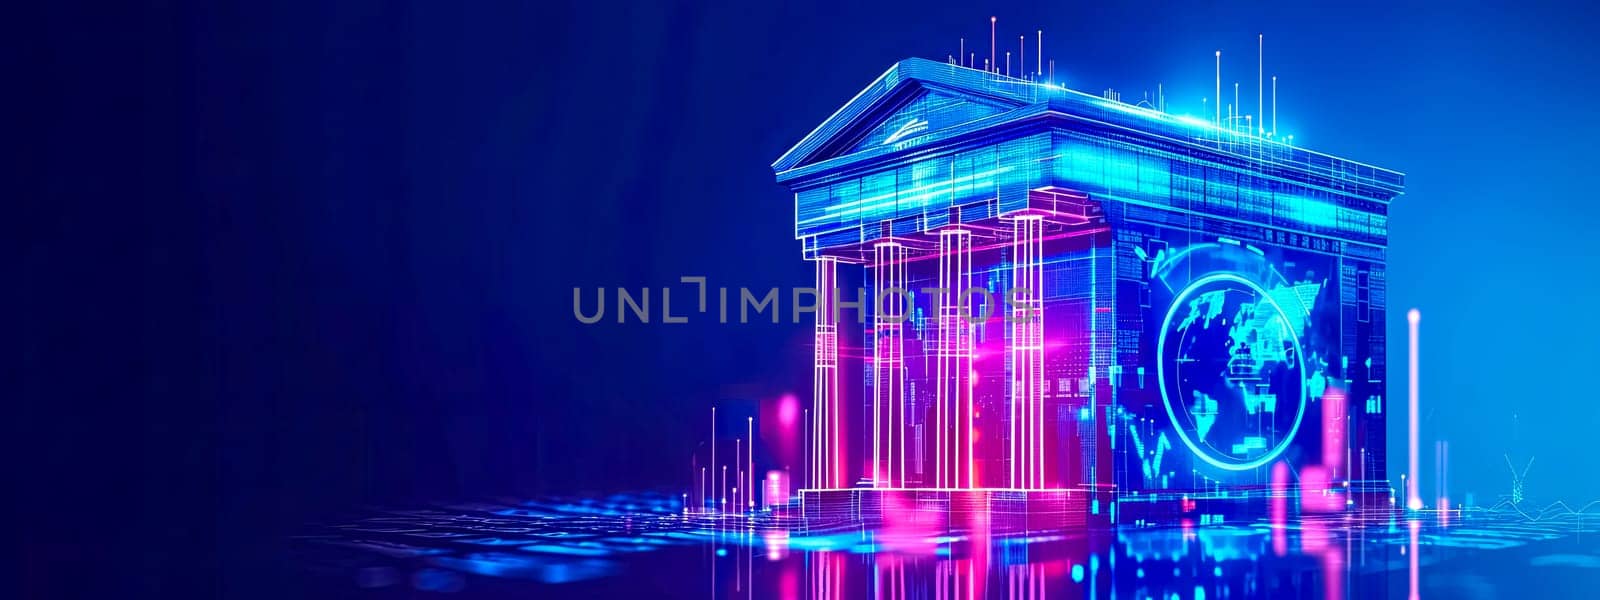 Futuristic Cybernetic Building in Neon Hues - Digital Technology and Virtual Reality Concept. copy space